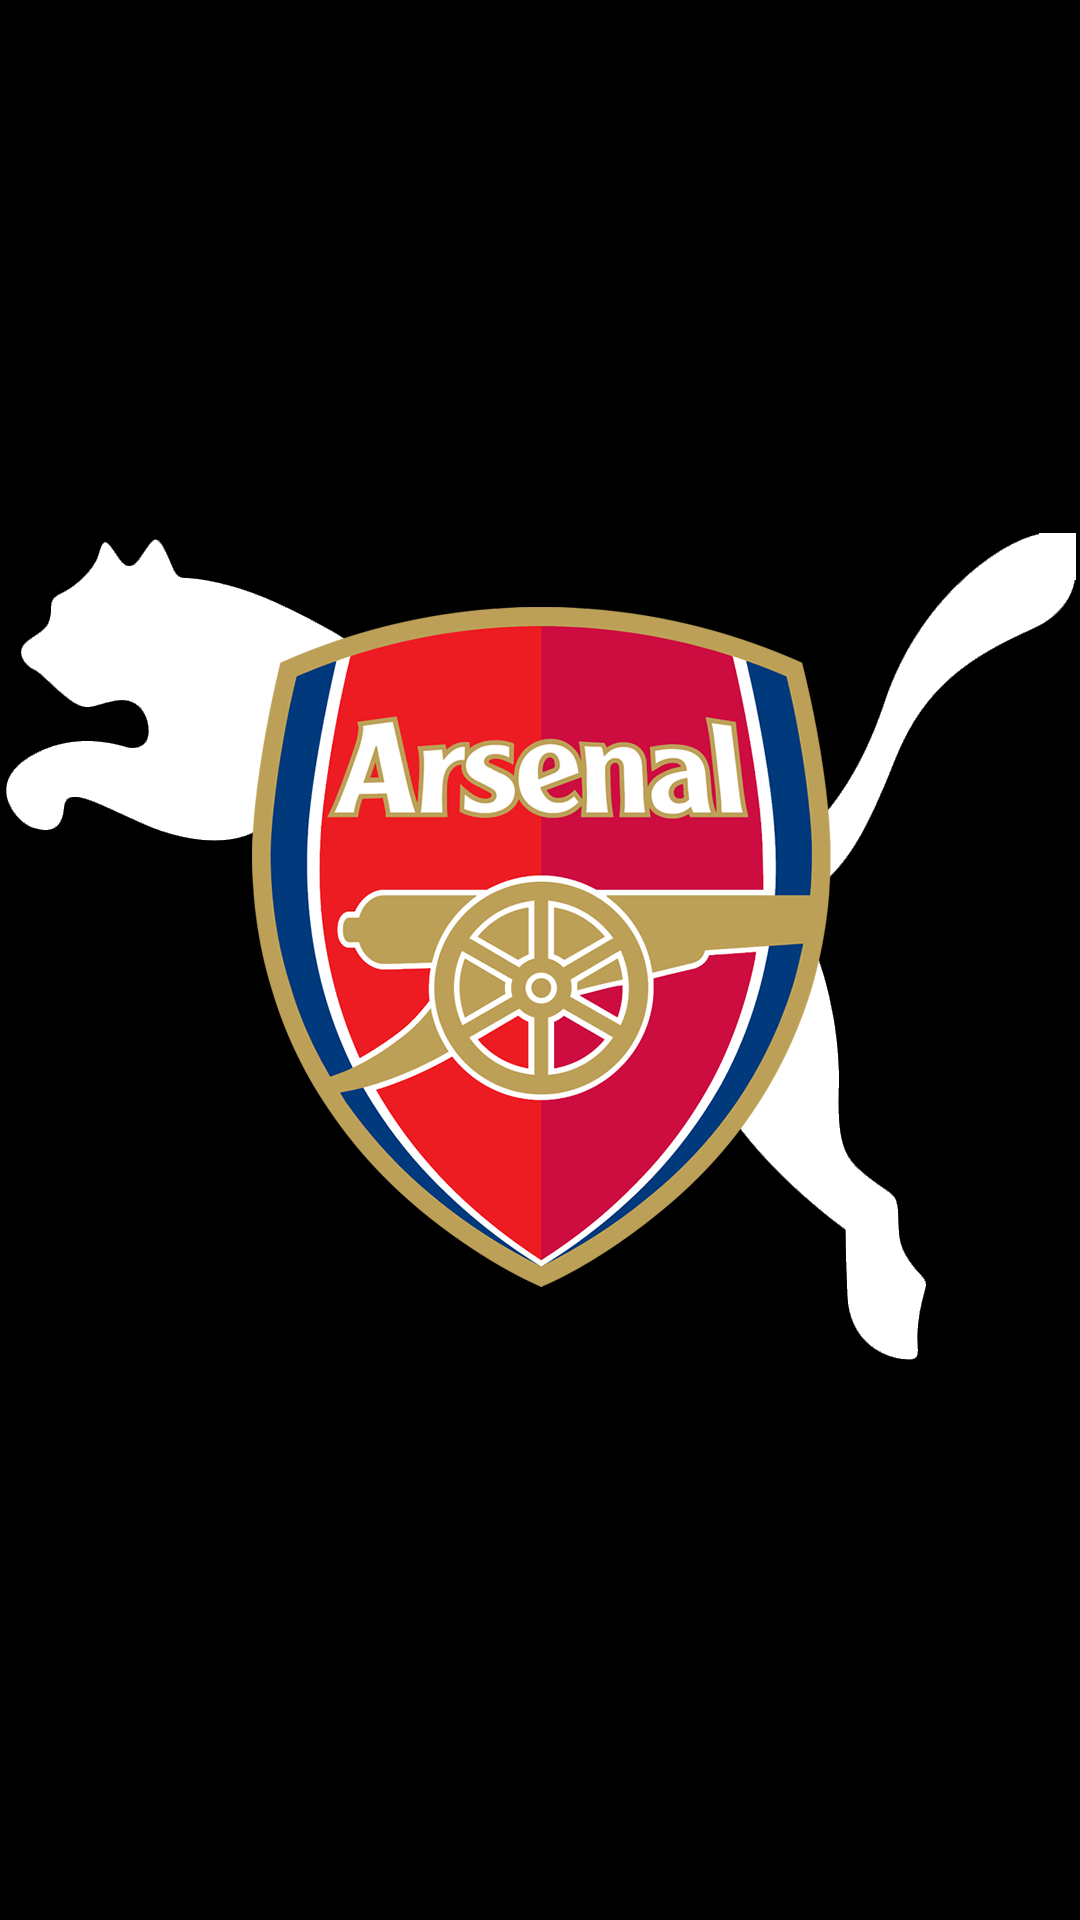 Arsenal Logo And Puma Wallpaper For Mobile - Arsenal Logo Wallpaper Phone -  1080x1920 Wallpaper 